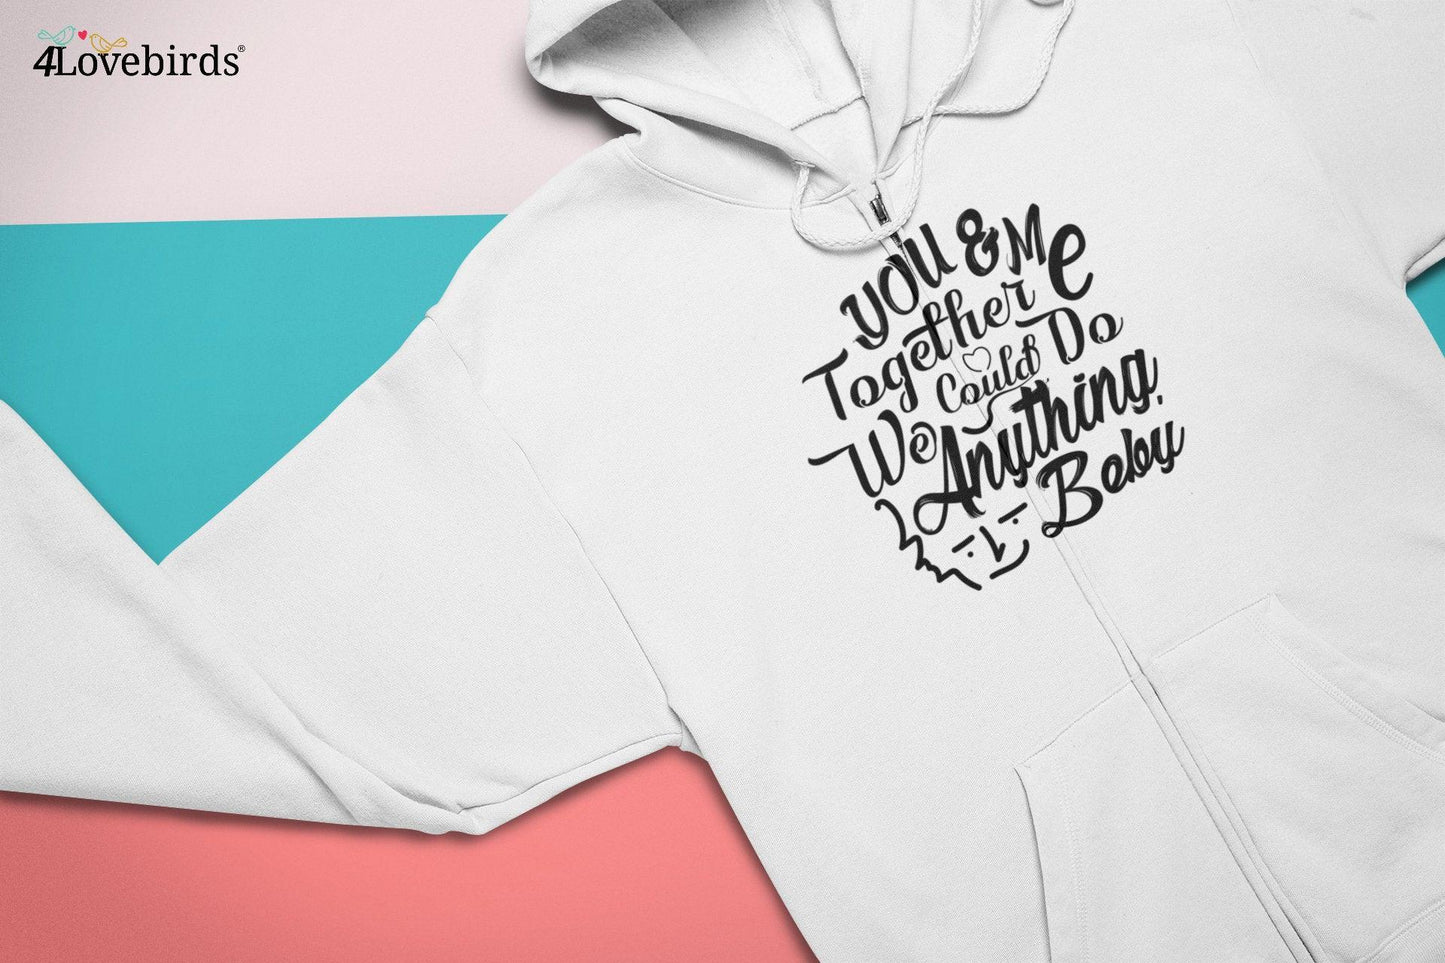 You & me together we could do anything baby Hoodie, Lovers T-shirt, Gift for Couple, Valentine Sweatshirt, Boyfriend / Girlfriend Longsleeve - 4Lovebirds